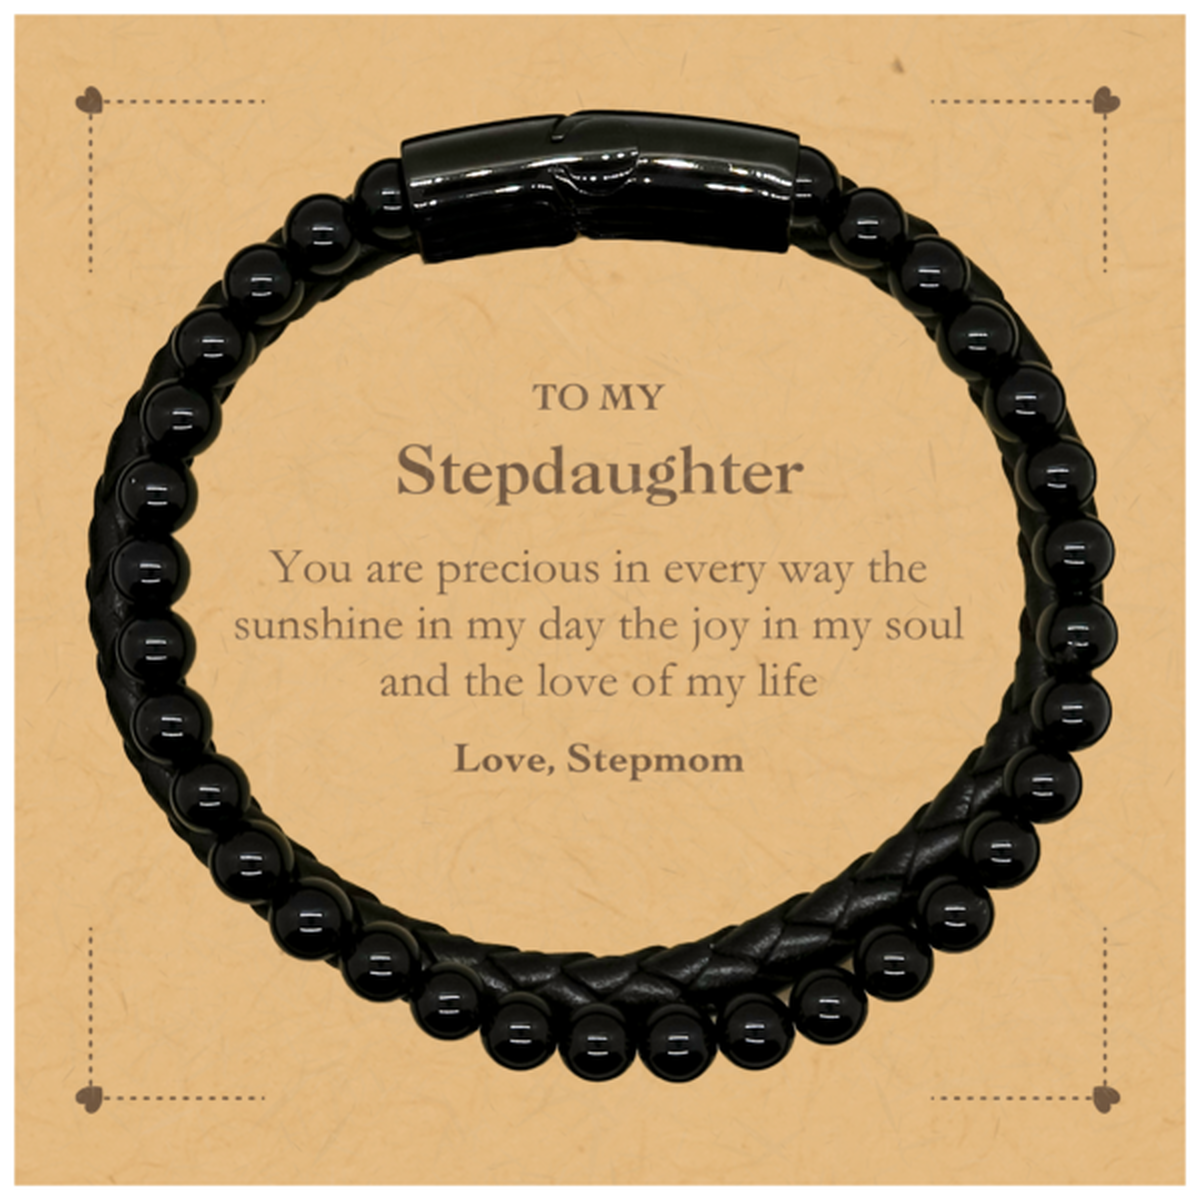 Graduation Gifts for Stepdaughter Stone Leather Bracelets Present from Stepmom, Christmas Stepdaughter Birthday Gifts Stepdaughter You are precious in every way the sunshine in my day. Love, Stepmom